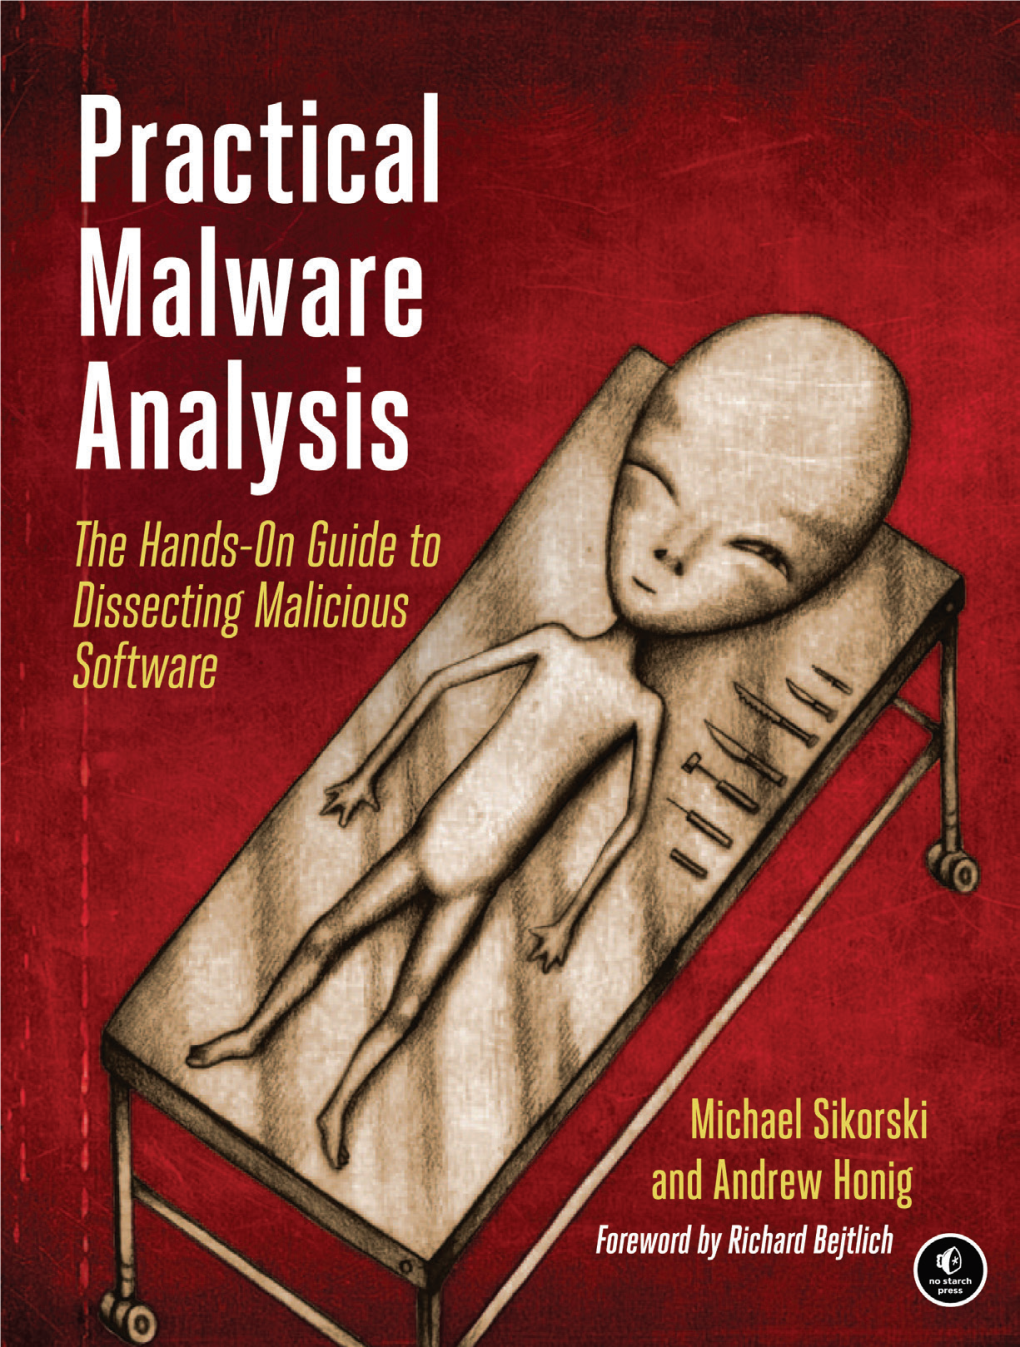 PRACTICAL MALWARE ANALYSIS. Copyright © 2012 by Michael Sikorski and Andrew Honig